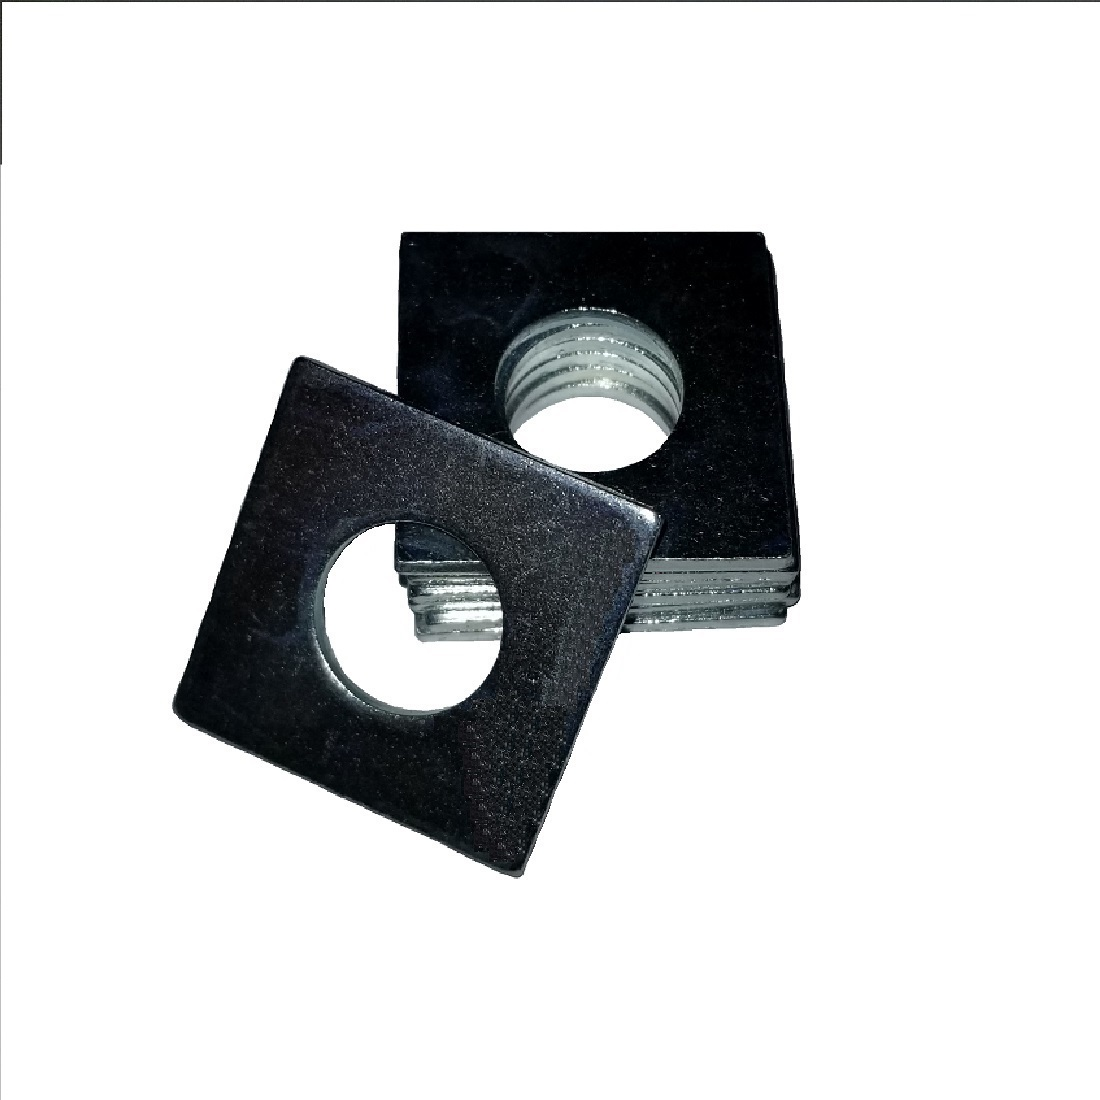 Square OD Washer - 0.468 ID, 2.000 OD, 0.134 Thick, Low Carbon Steel - Soft